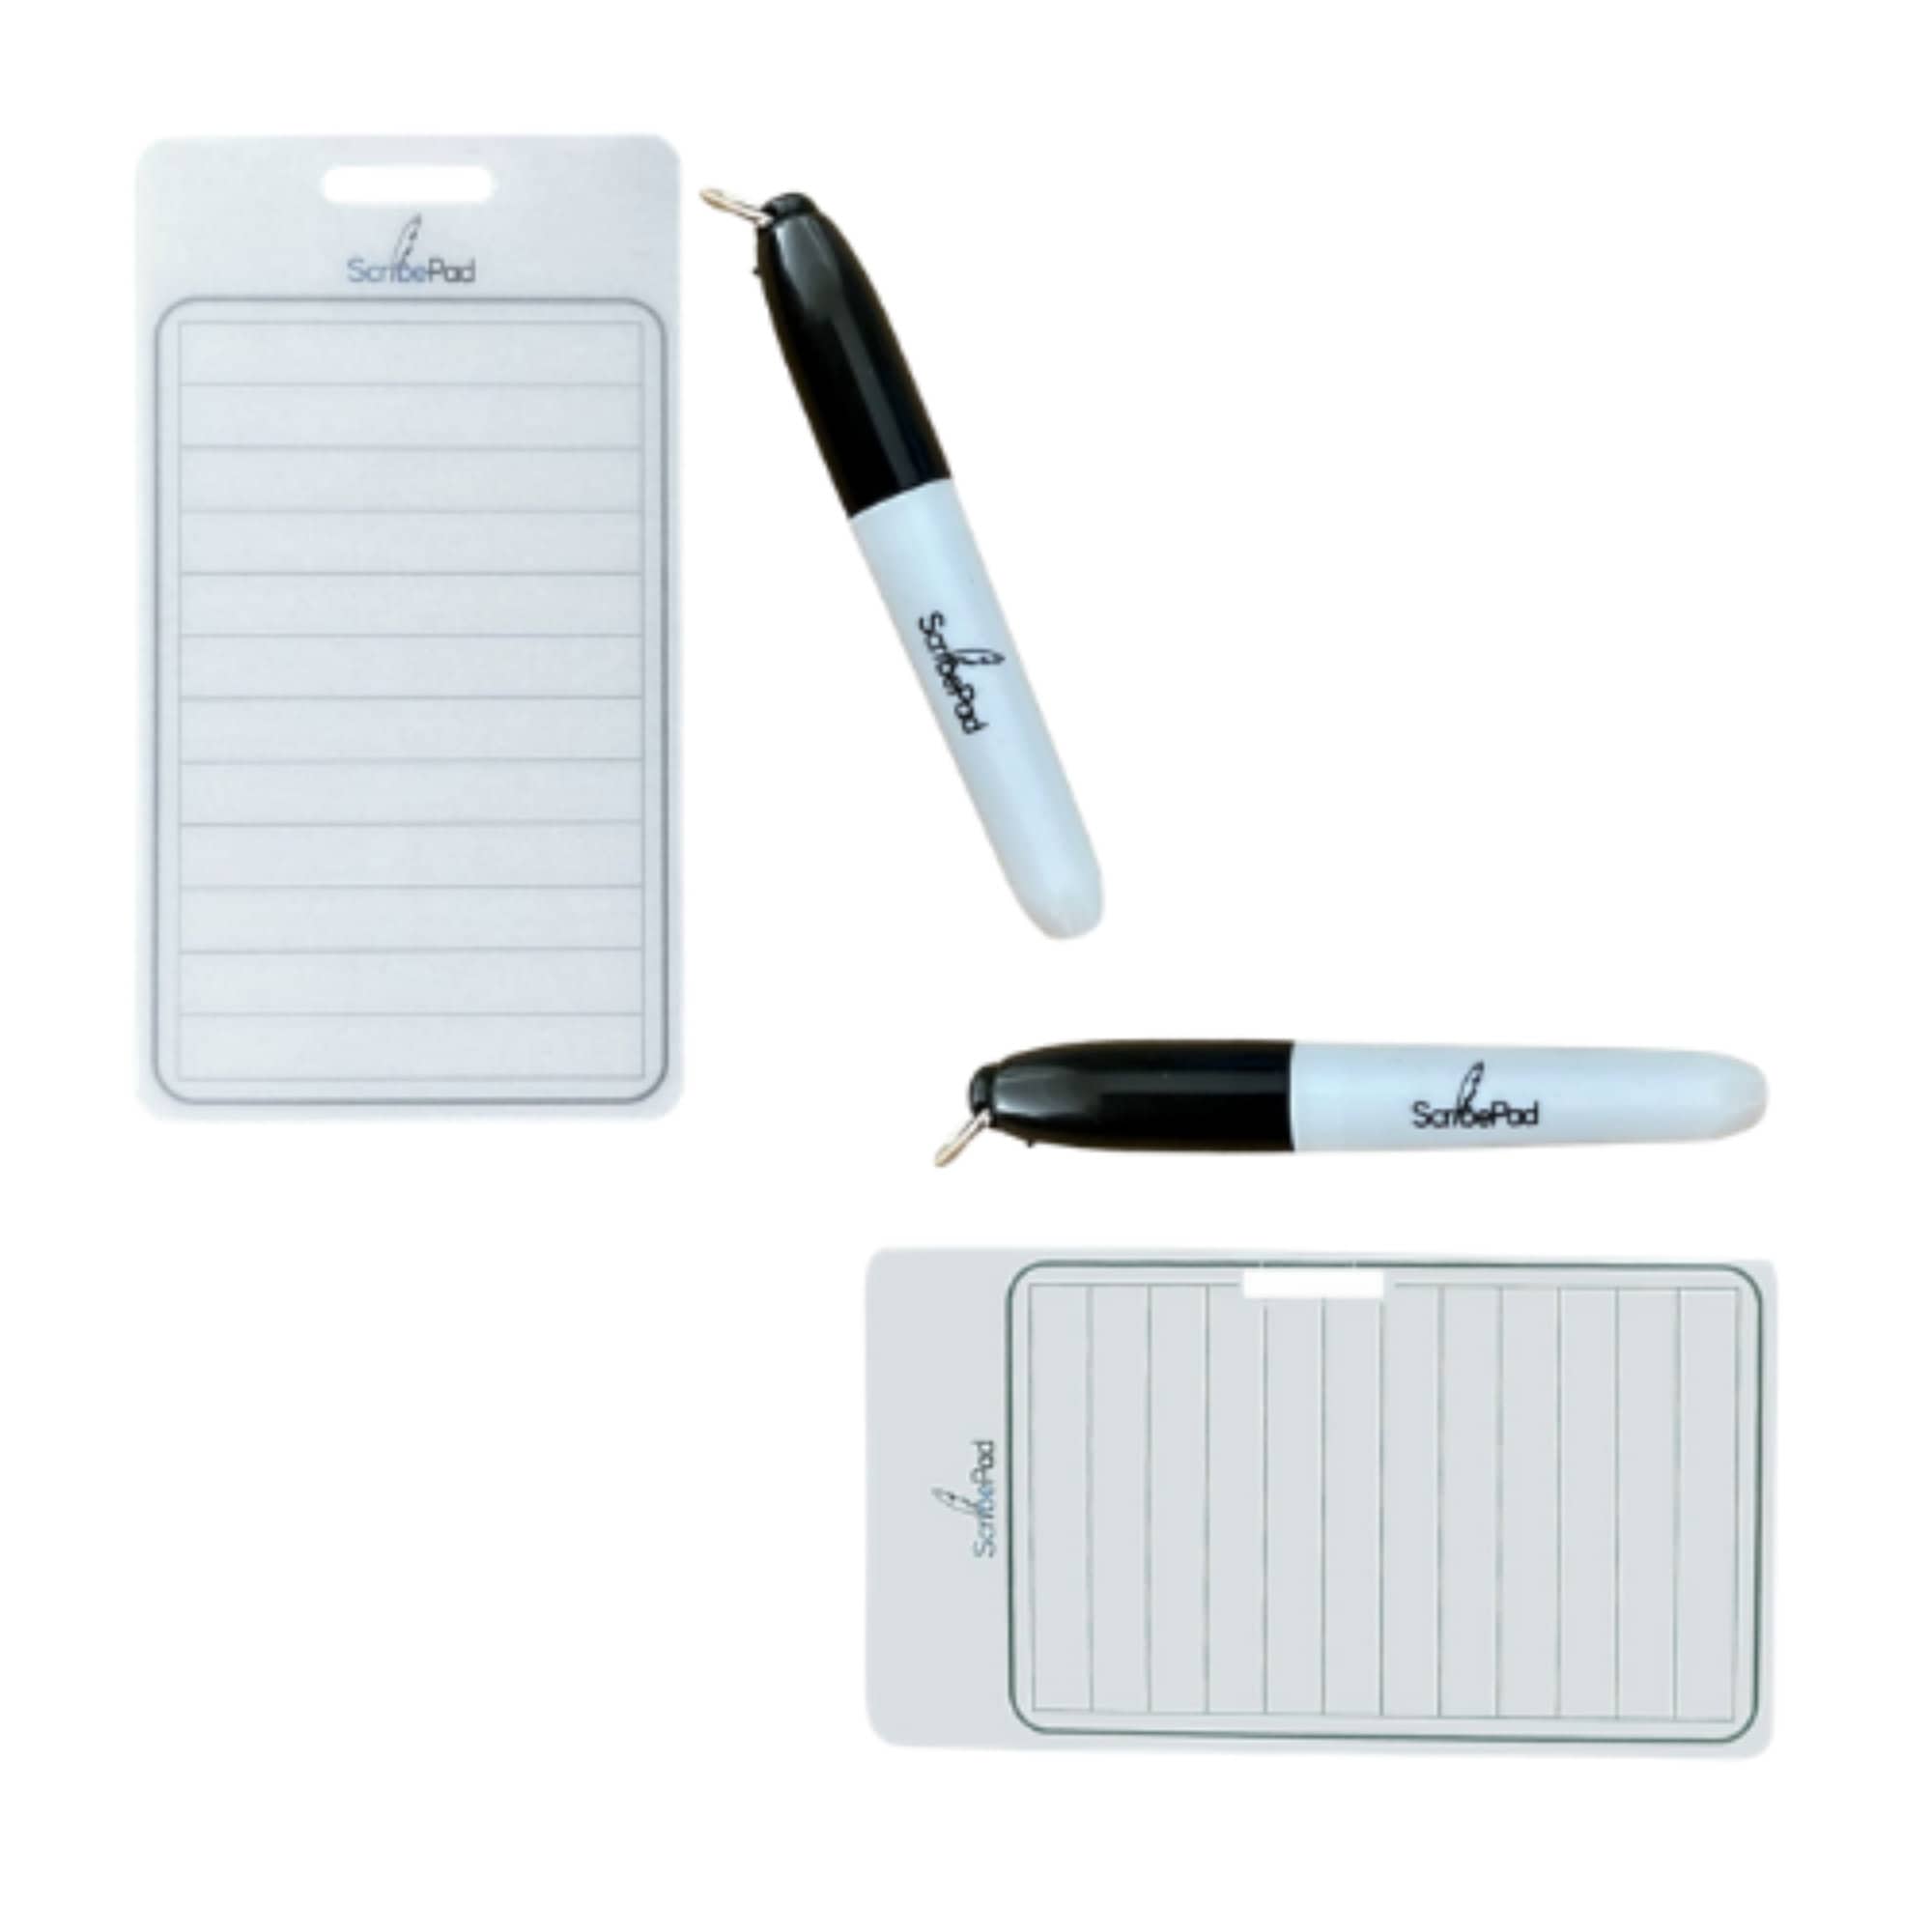 Additional Notepad and Marker Pack – ScribePad